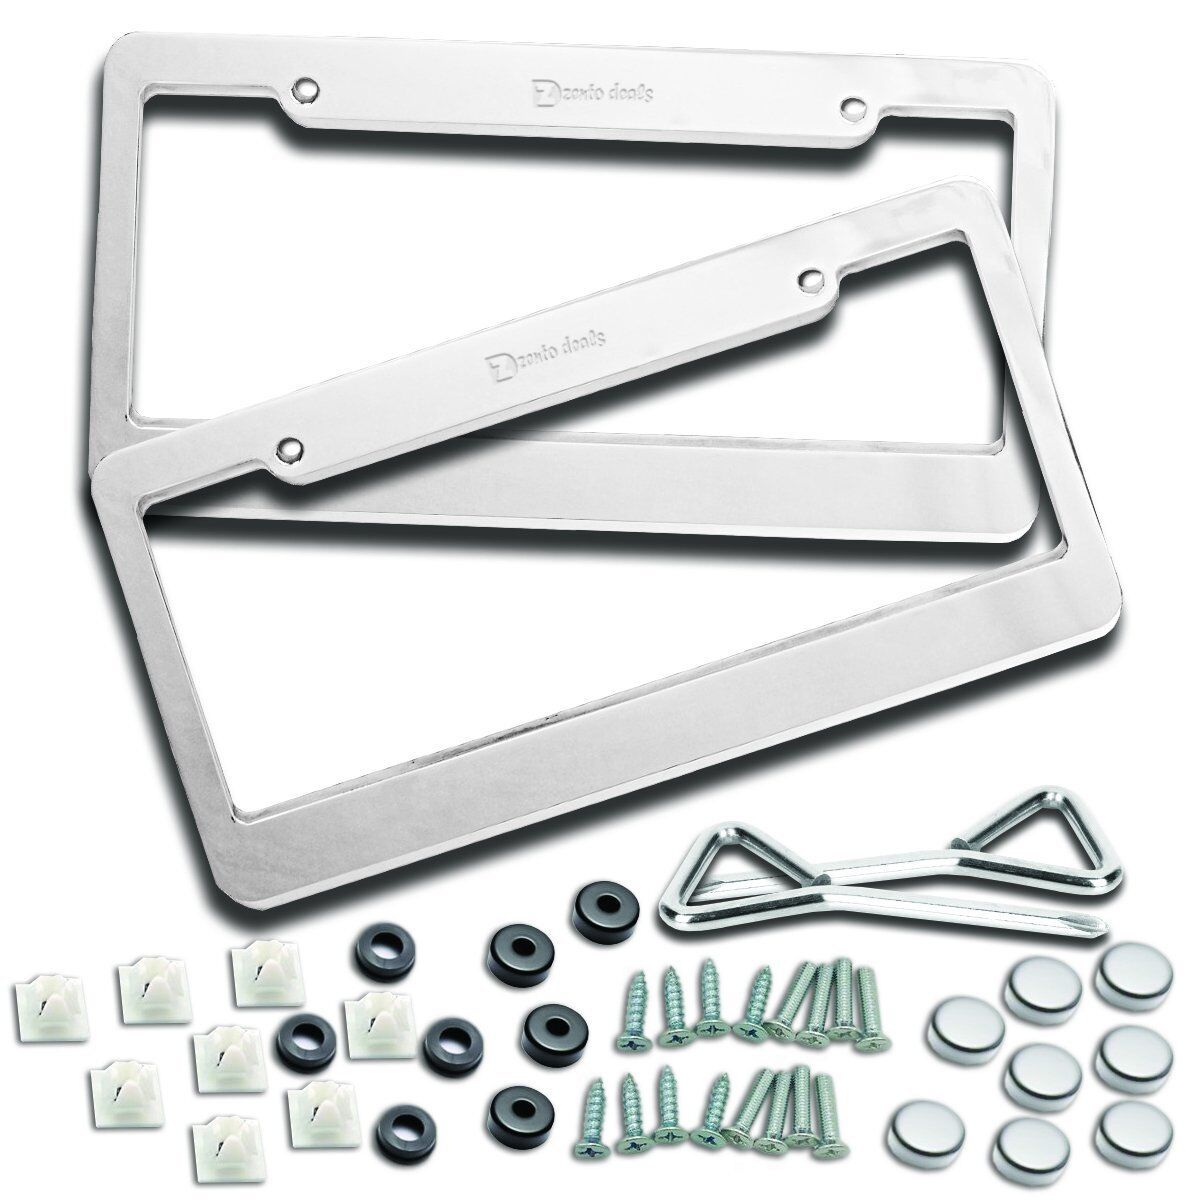 Zento Deals 2 Pack Aluminum License Plate Frame with Screws Anti-Theft 